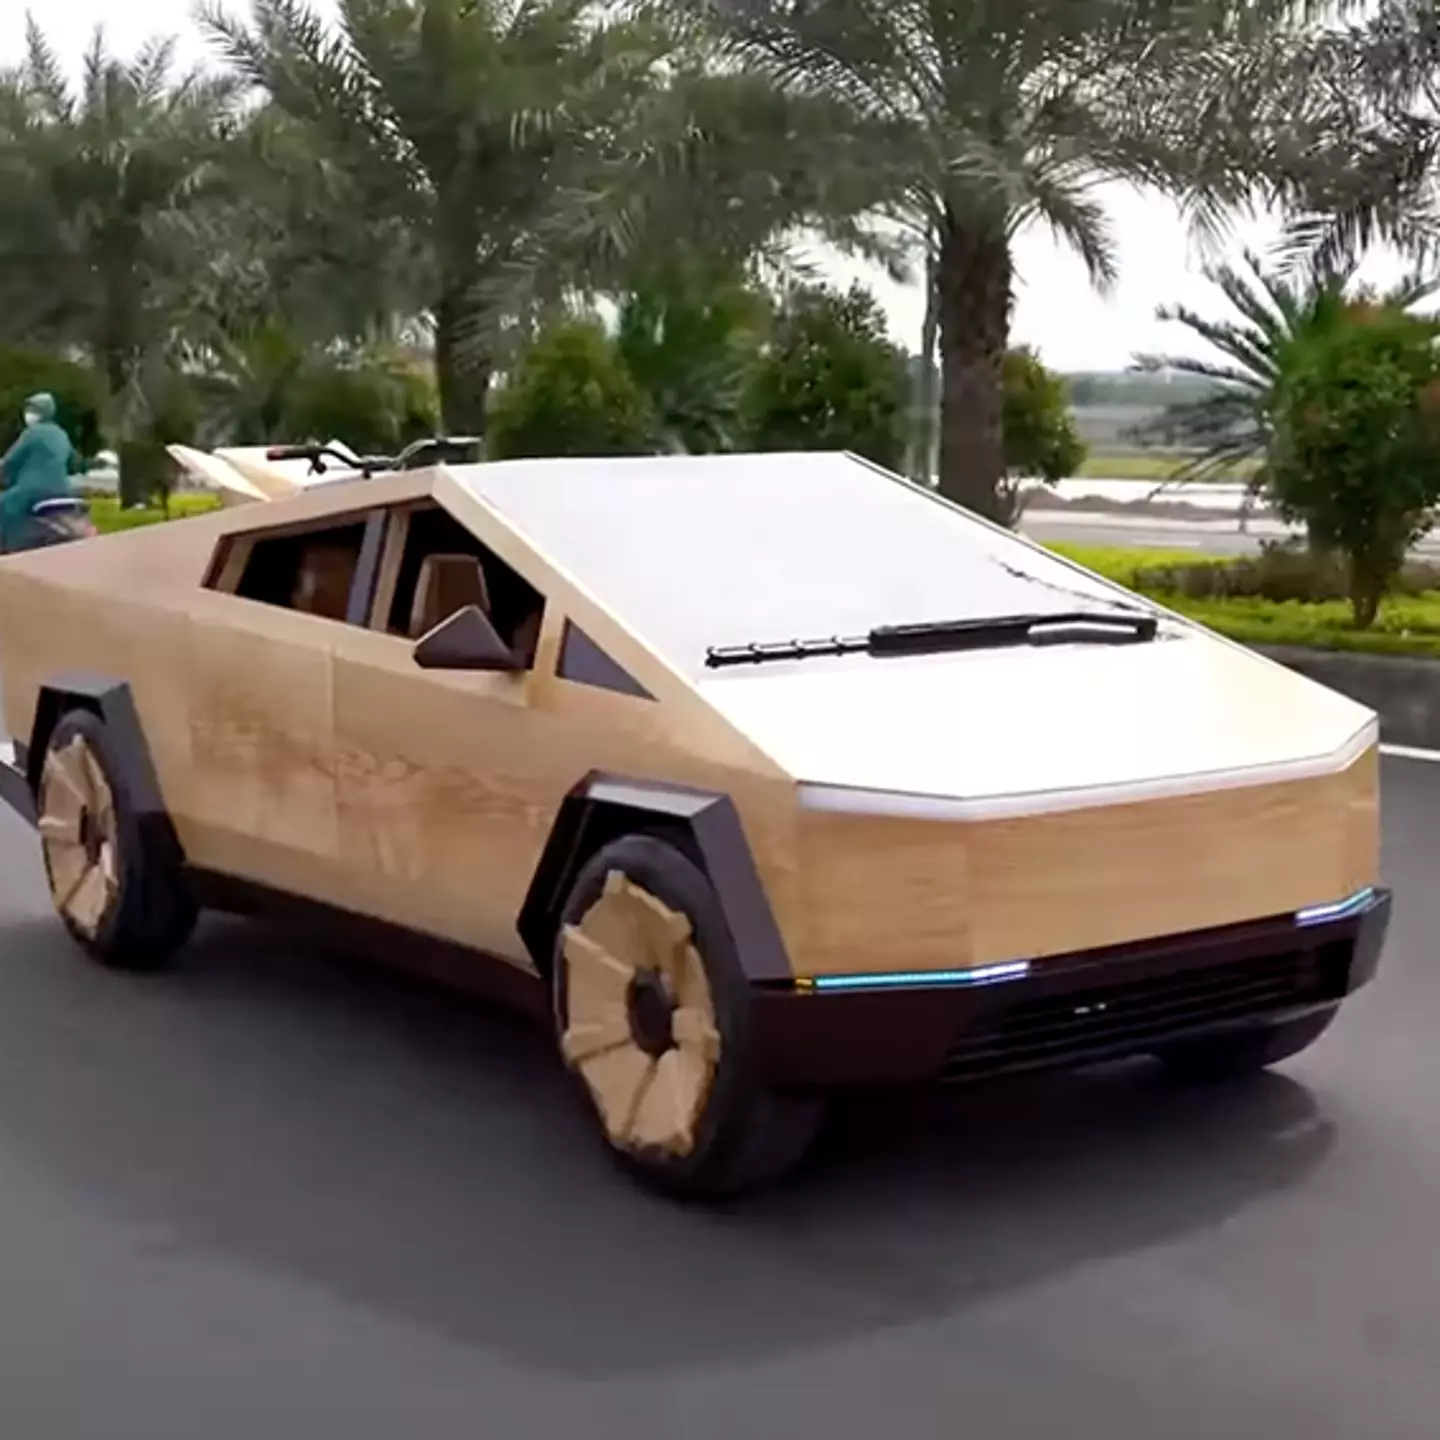 Elon Musk responds to man who spent $15,000 making a fully functional Cybertruck out of wood